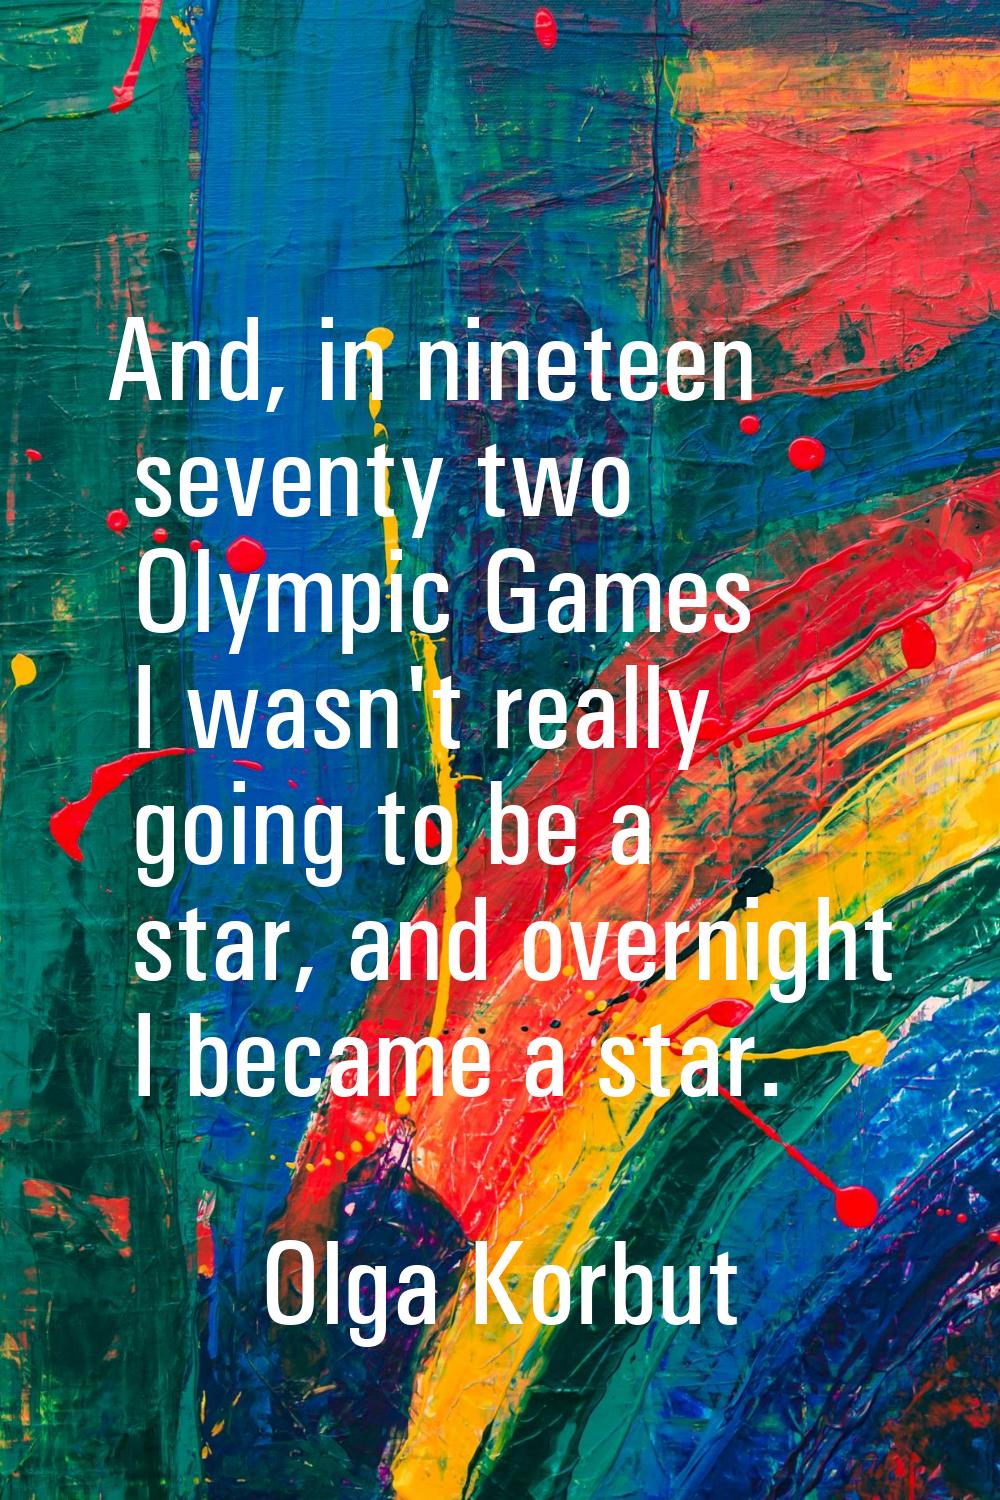 And, in nineteen seventy two Olympic Games I wasn't really going to be a star, and overnight I beca